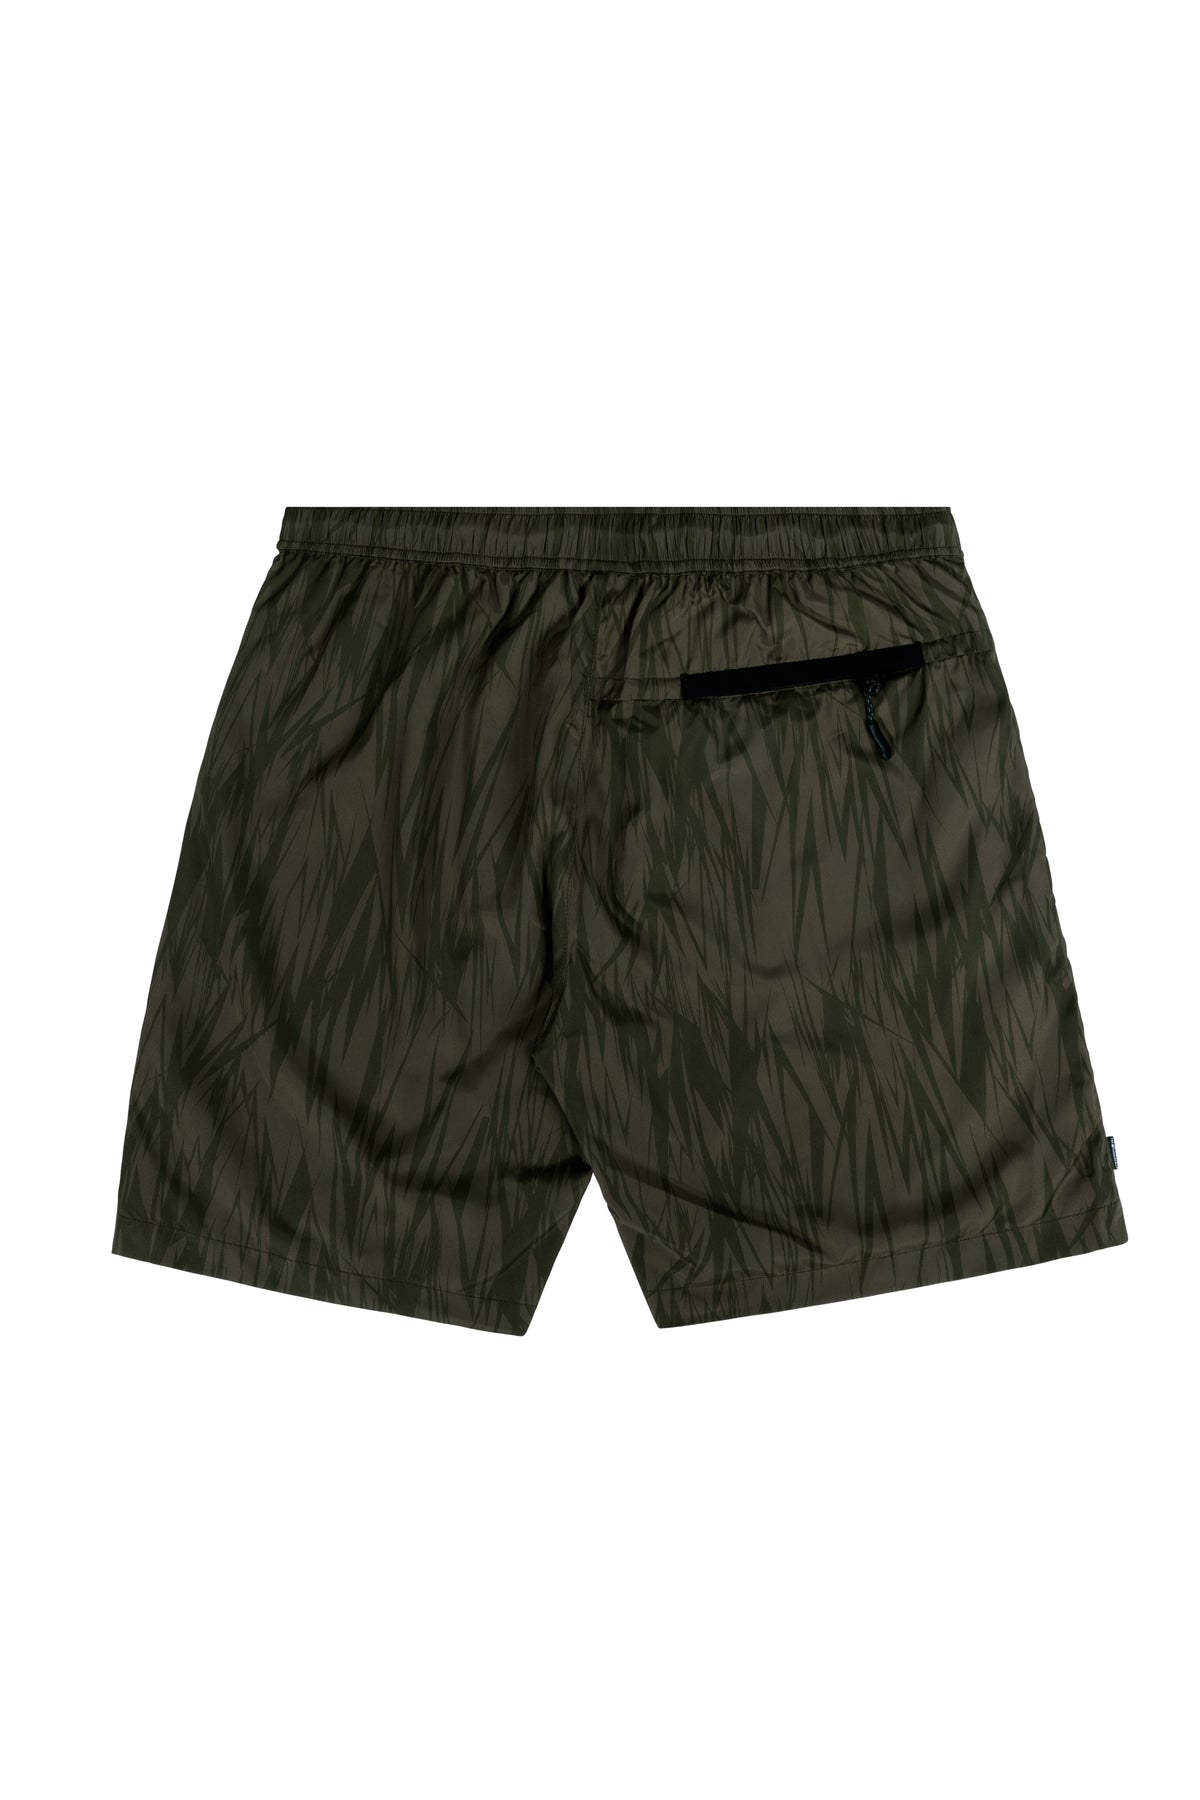 The Hundreds jags packable shorts olive